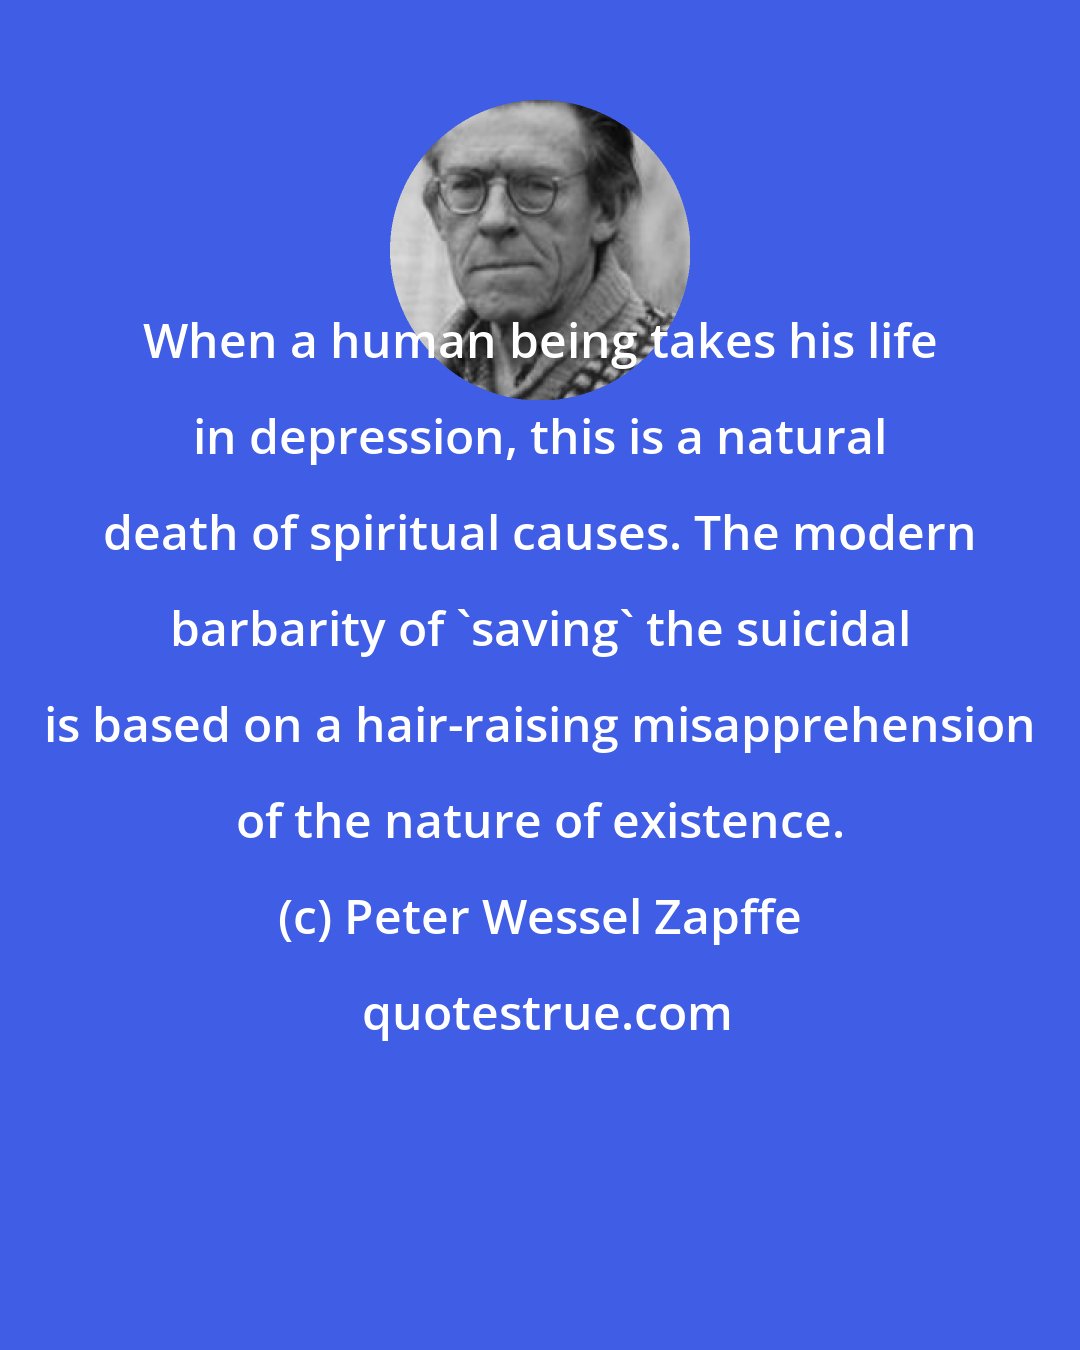 Peter Wessel Zapffe: When a human being takes his life in depression, this is a natural death of spiritual causes. The modern barbarity of 'saving' the suicidal is based on a hair-raising misapprehension of the nature of existence.